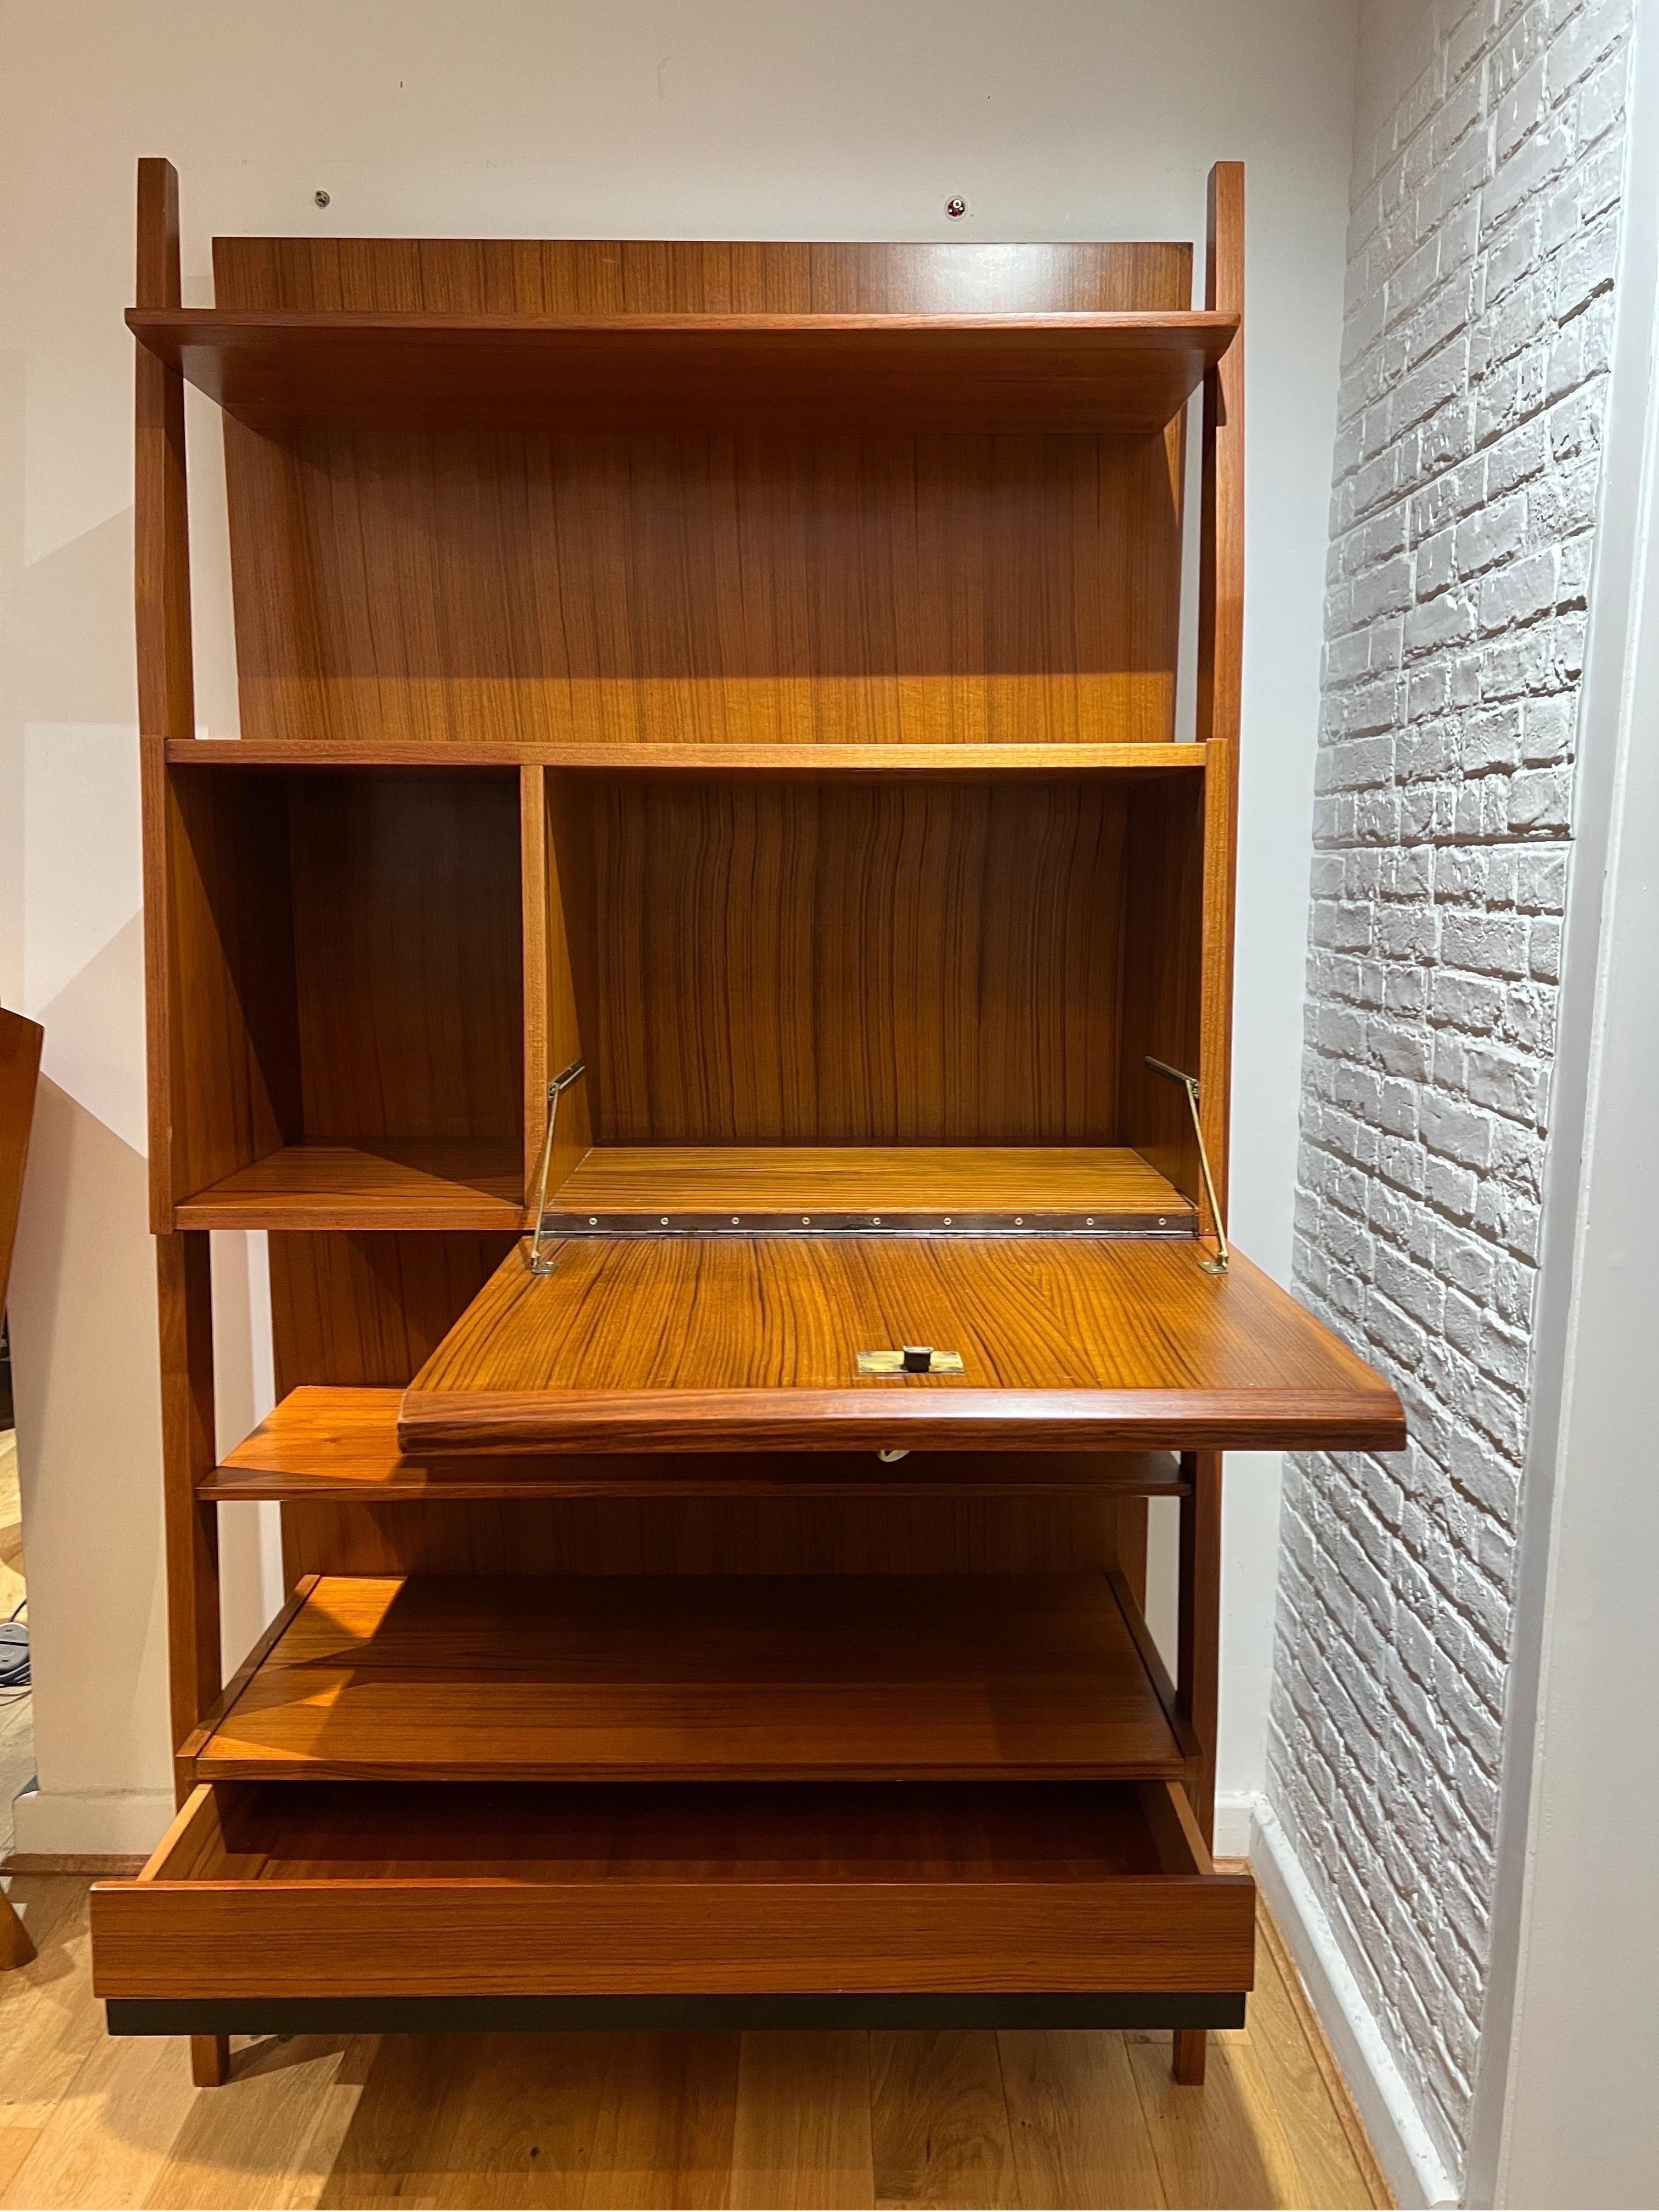 An Italian freestanding cherrywood bookcase consisting of 5 shelves and a lockable pull door that reveals a barware storage section. At the bottom a concealed single file drawer. The cabinet is supported on both sides by a full length